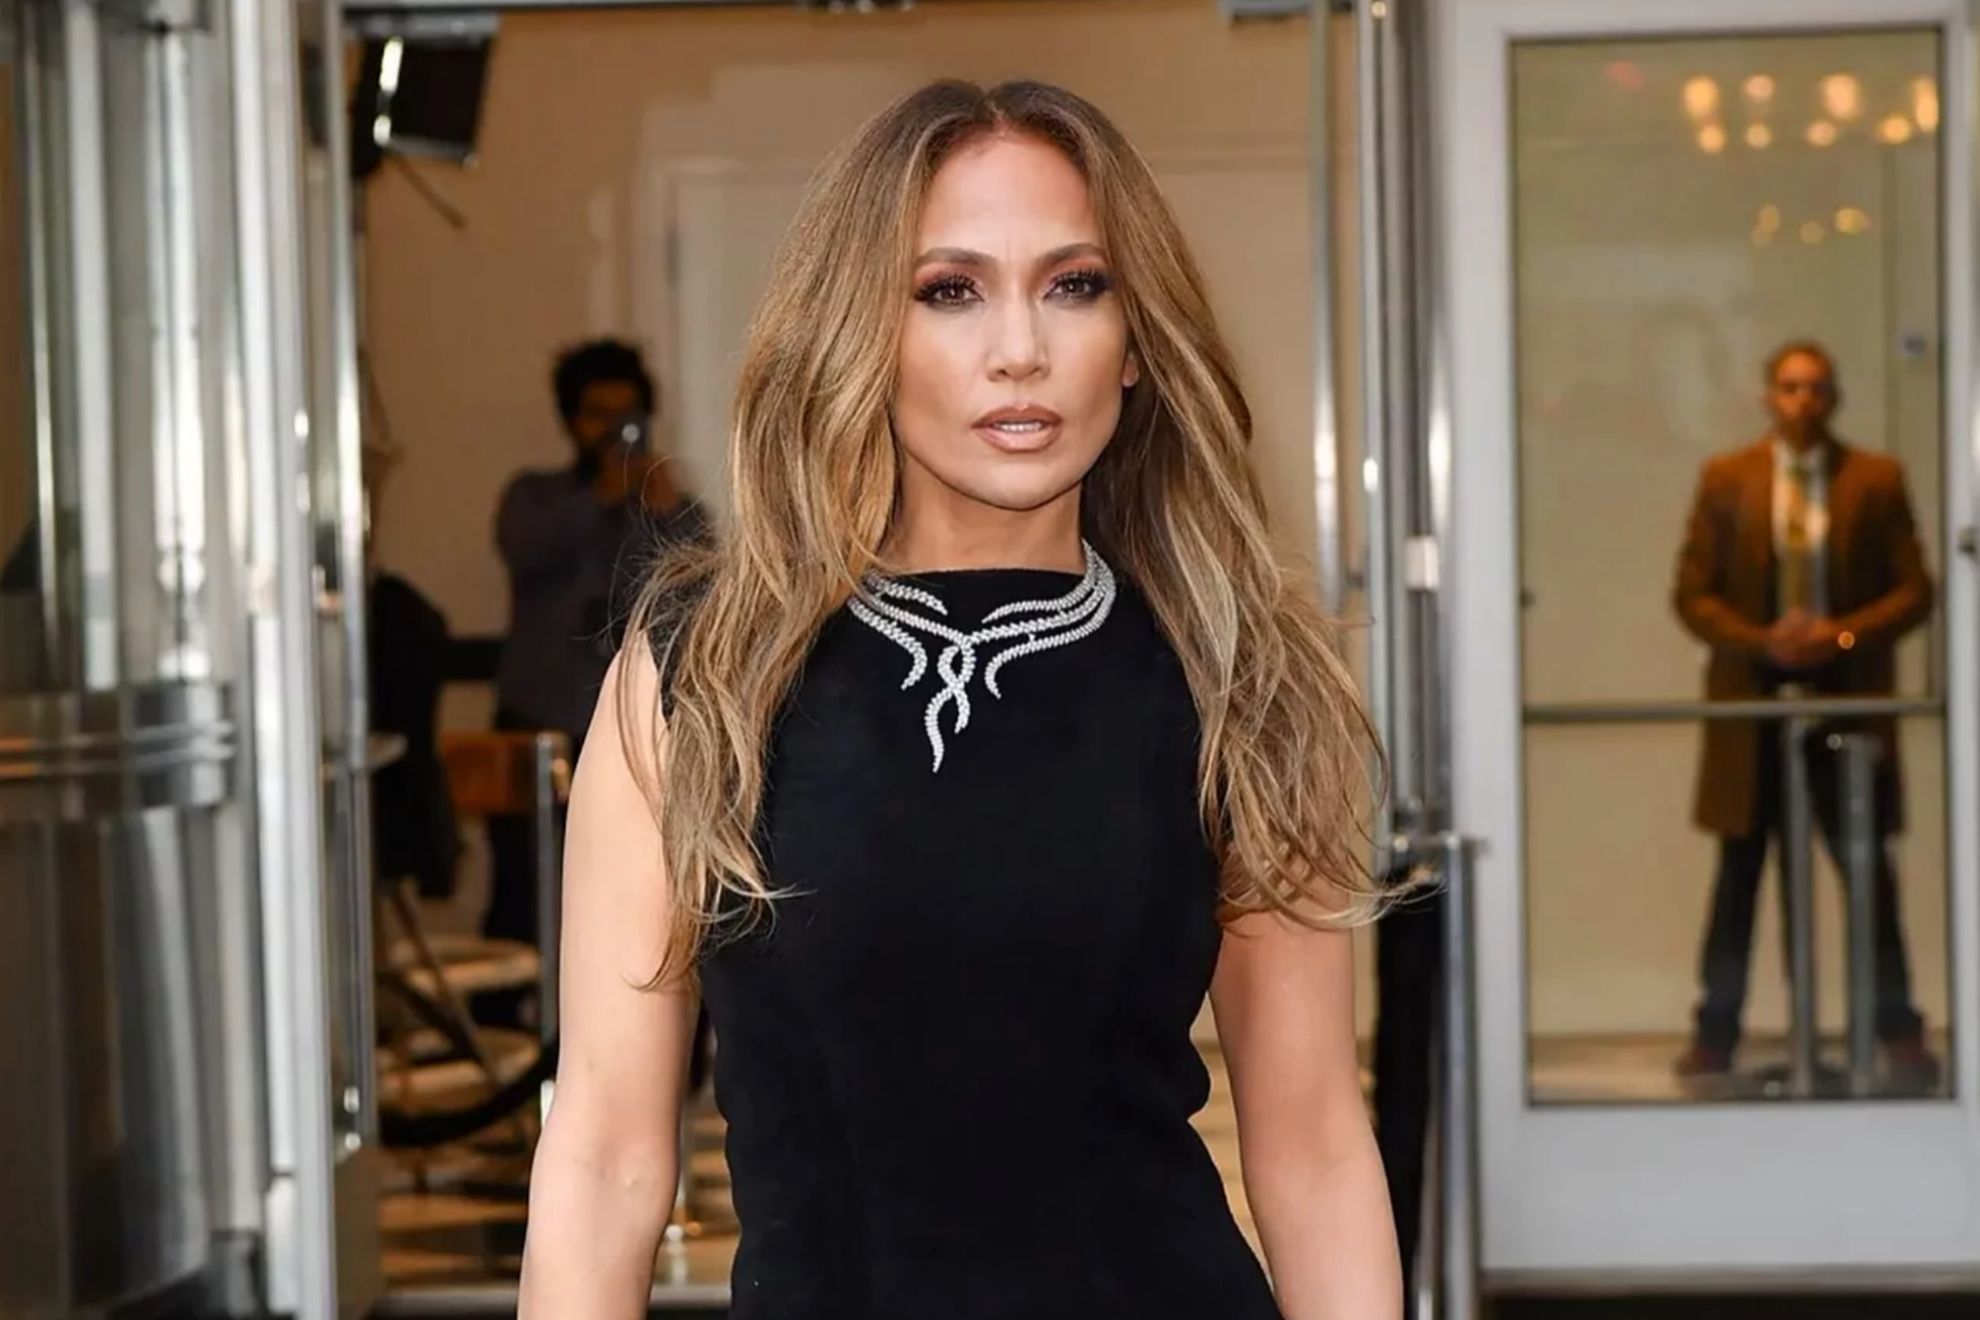 Jennifer Lopez shouts "F**k you" at paparazzi after being locked out of gym